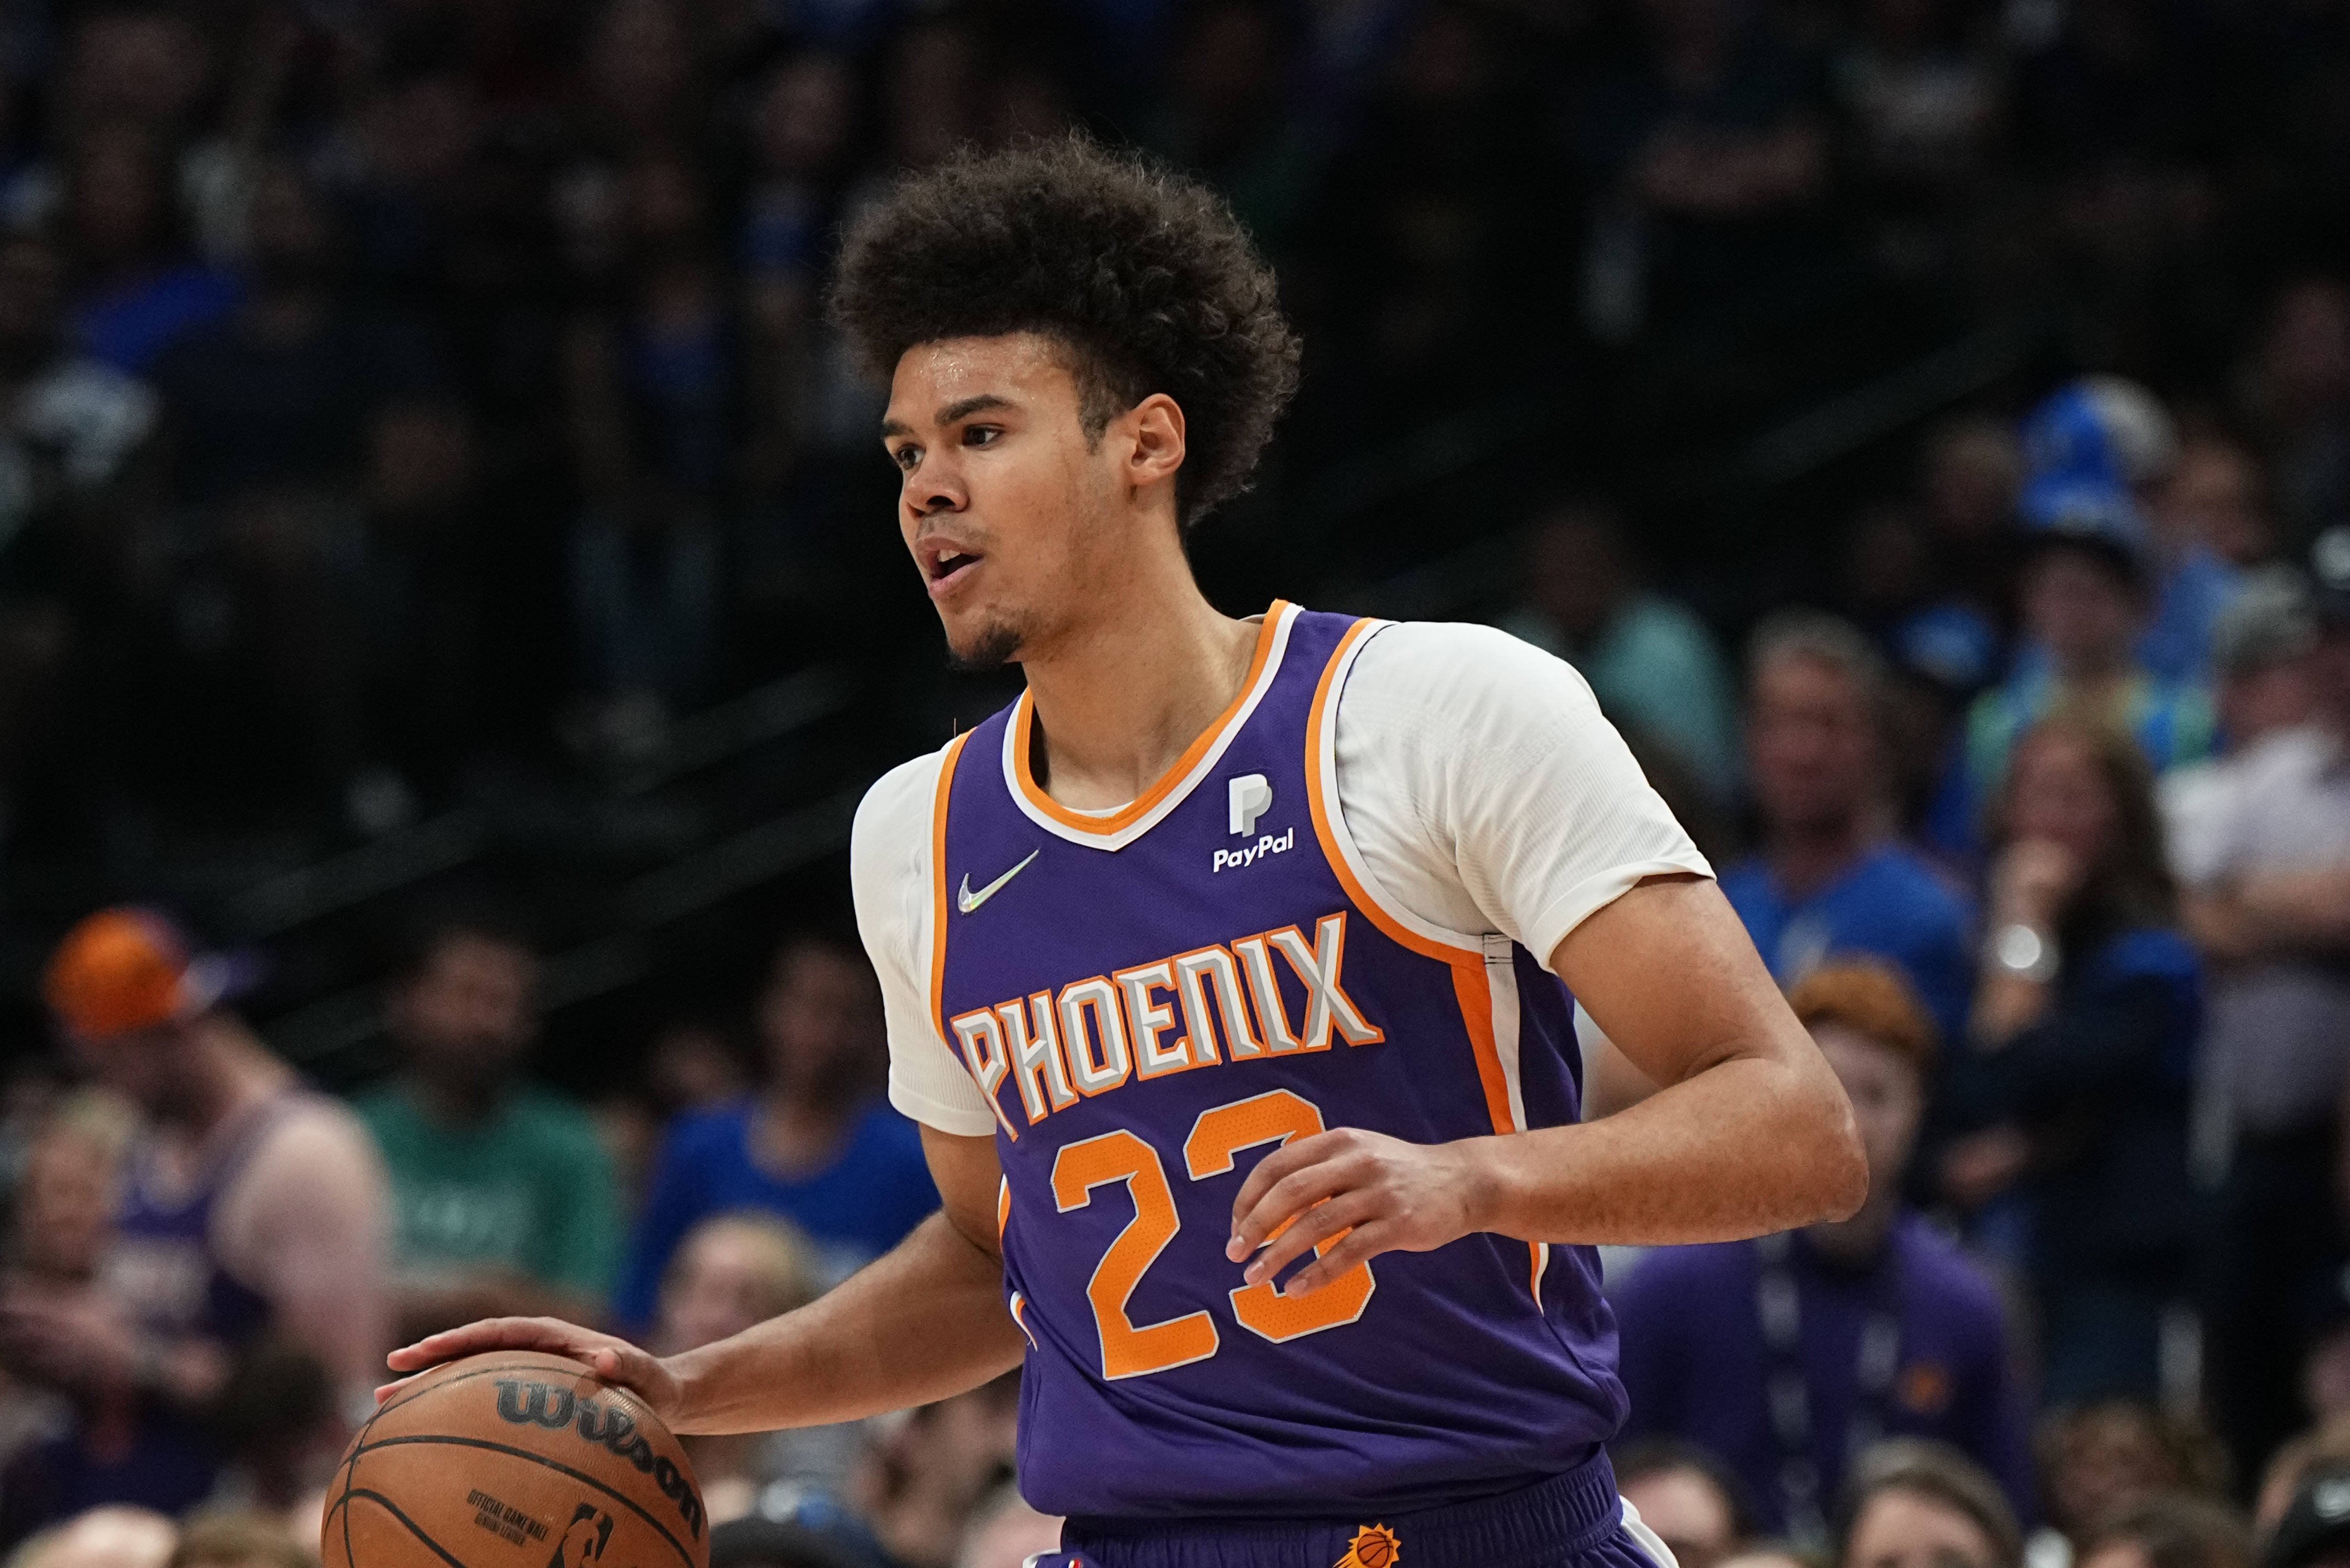 2023 NBA free agent rankings: Top players available next summer